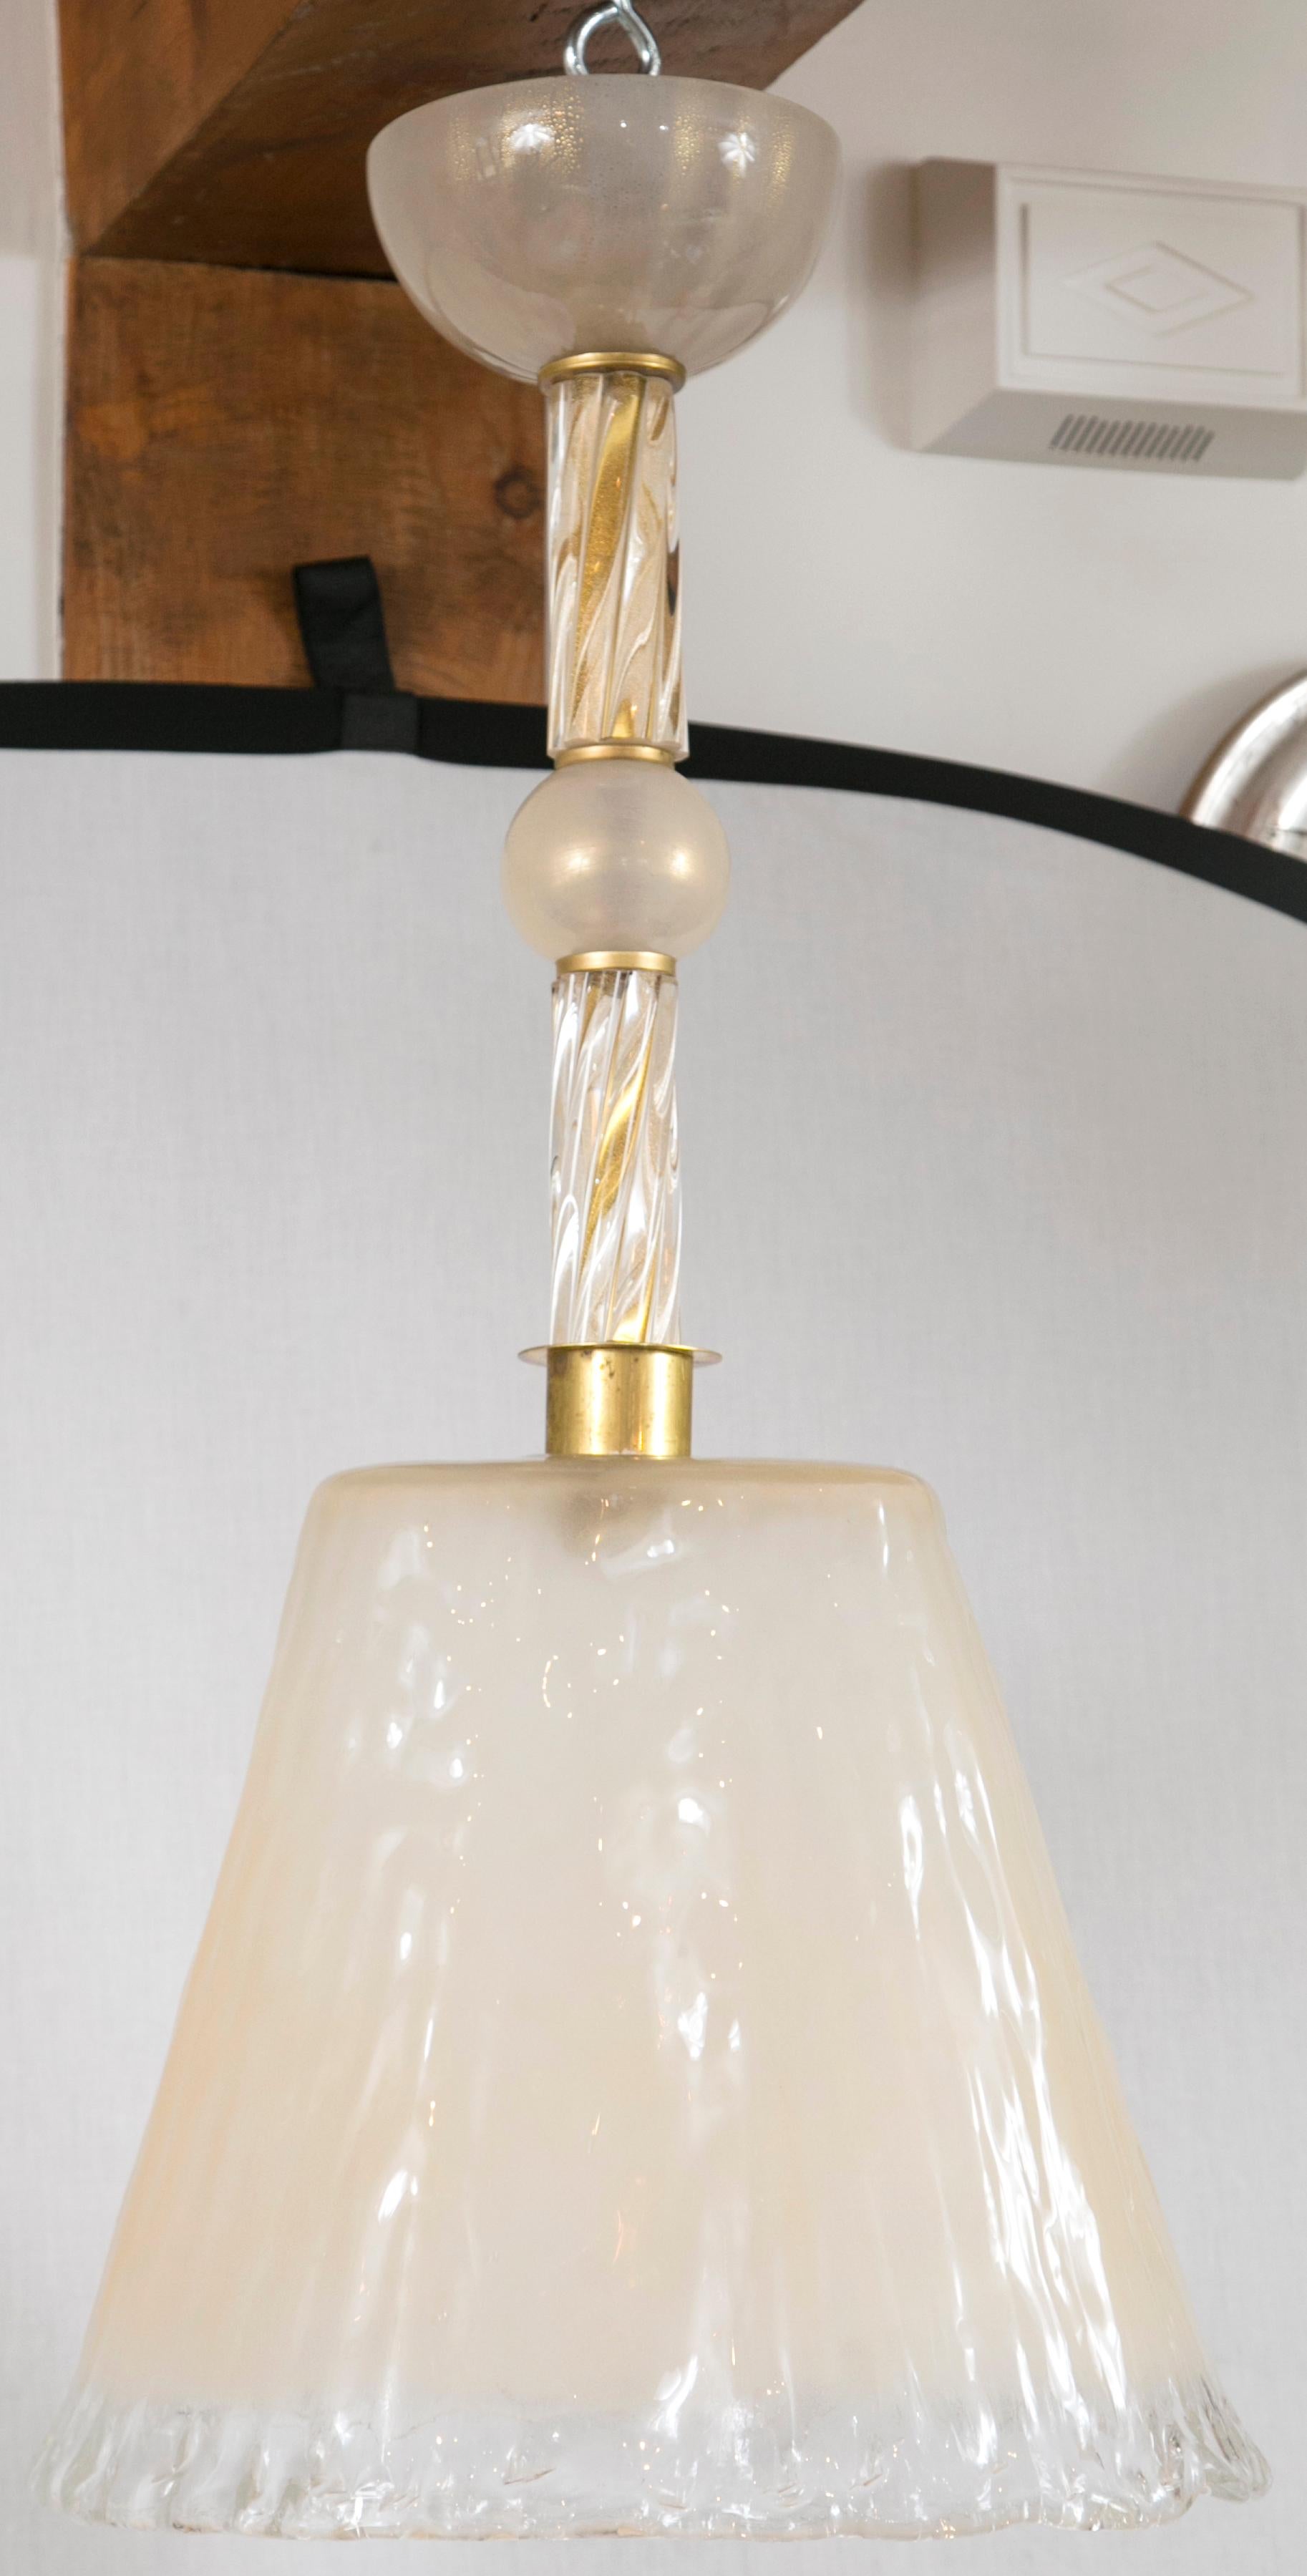 Stunning pair of vintage pendant lights with a stem comprised of 4 seperate blown pearled and shimmery white pieces finishing with a beautiful oval shaped shade with wavey bottom rim in a frosted color to act as a diffusor to soften the 